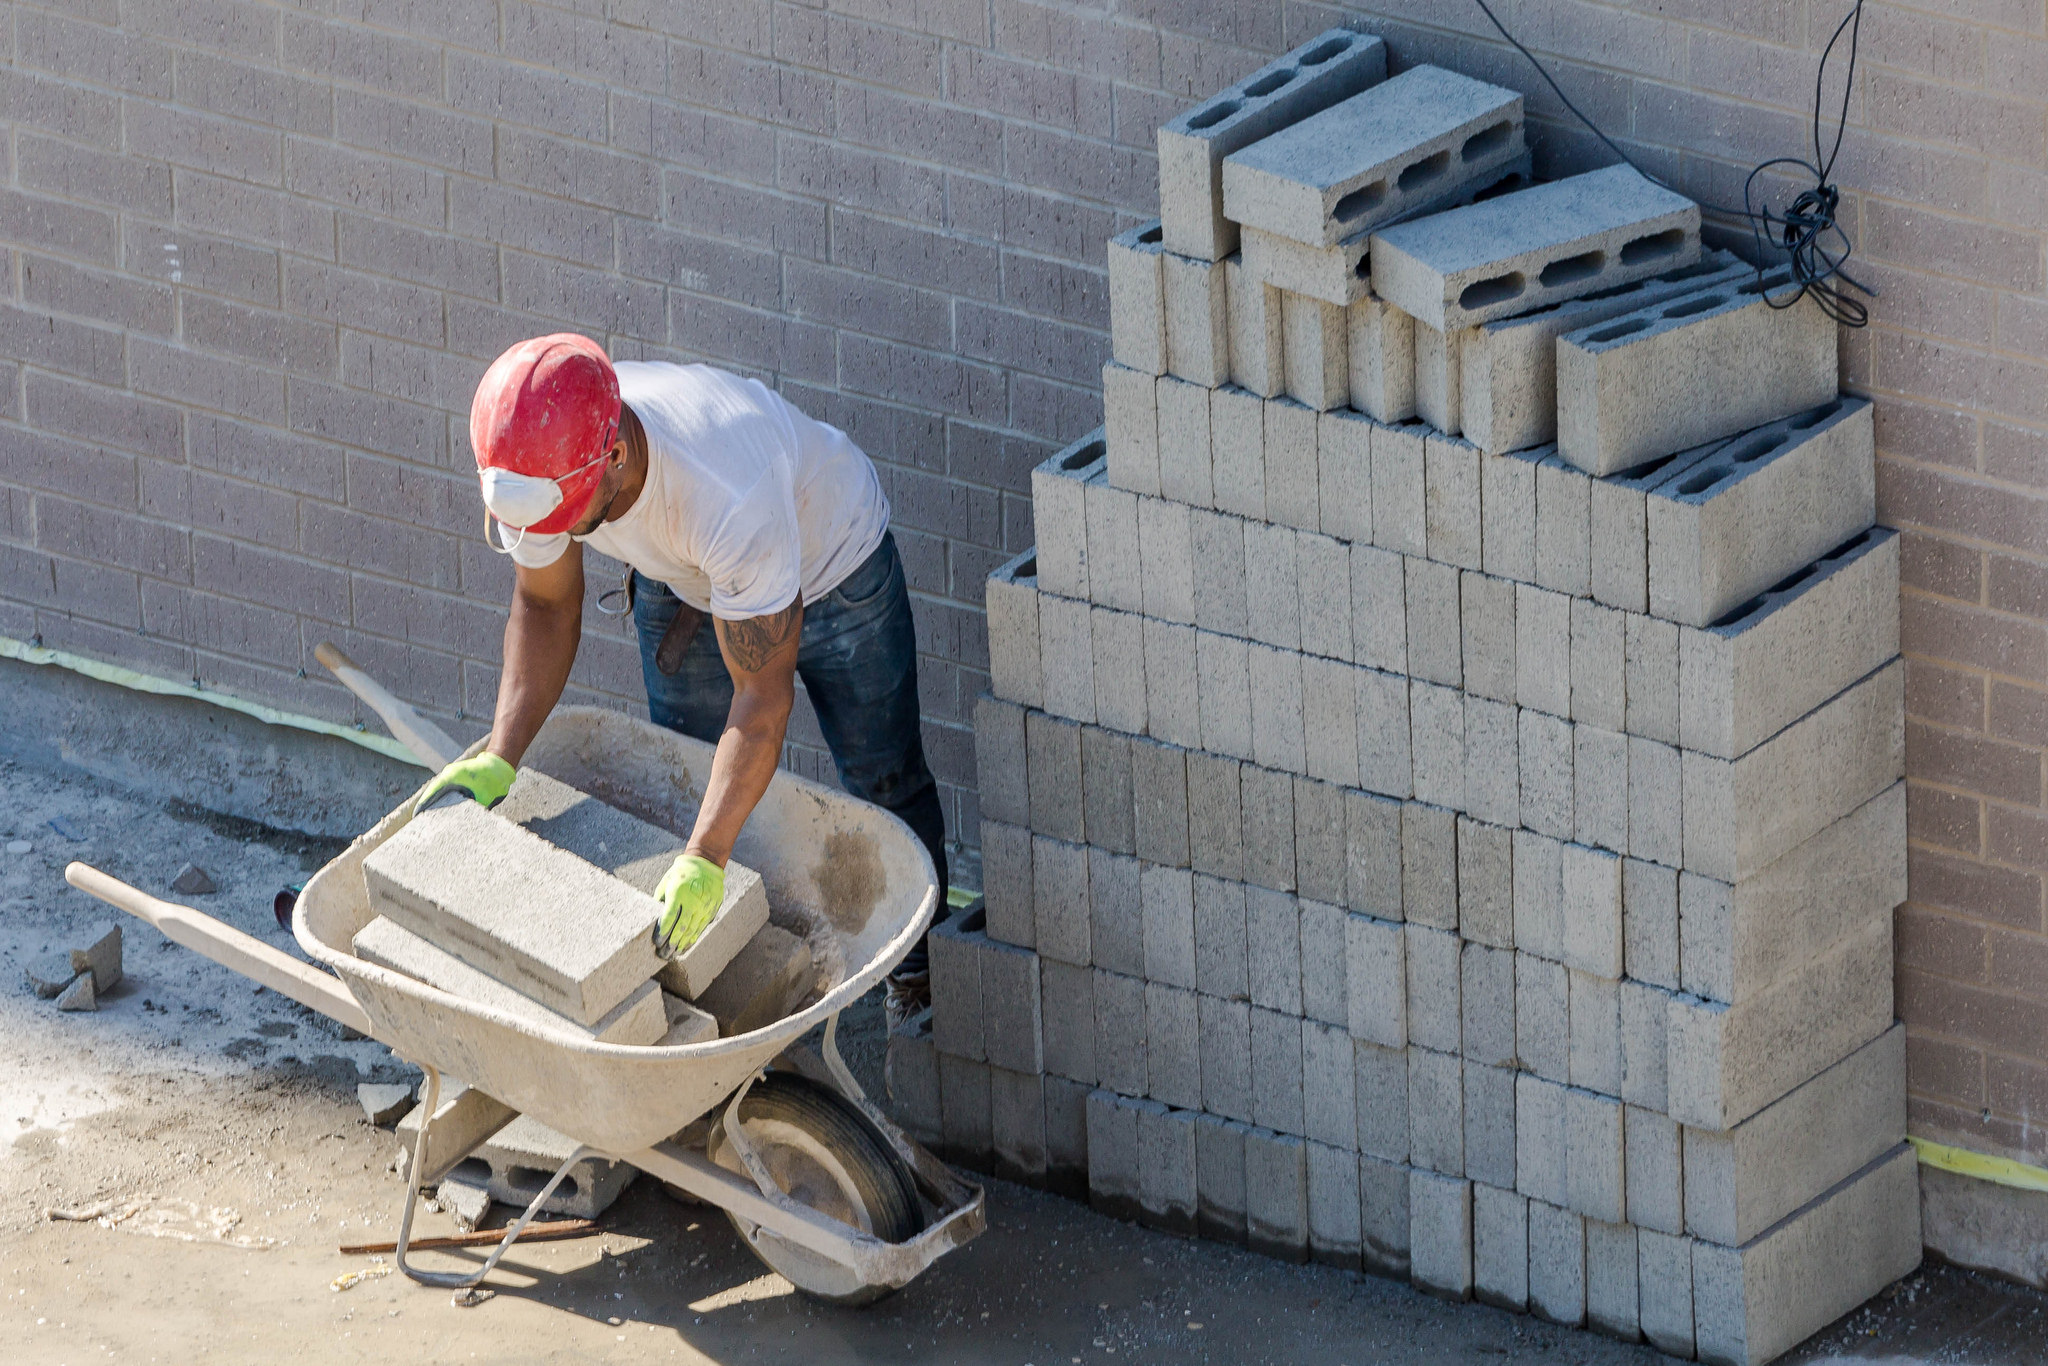 FMI survey: Millennials in construction industry are loyal, hard-working